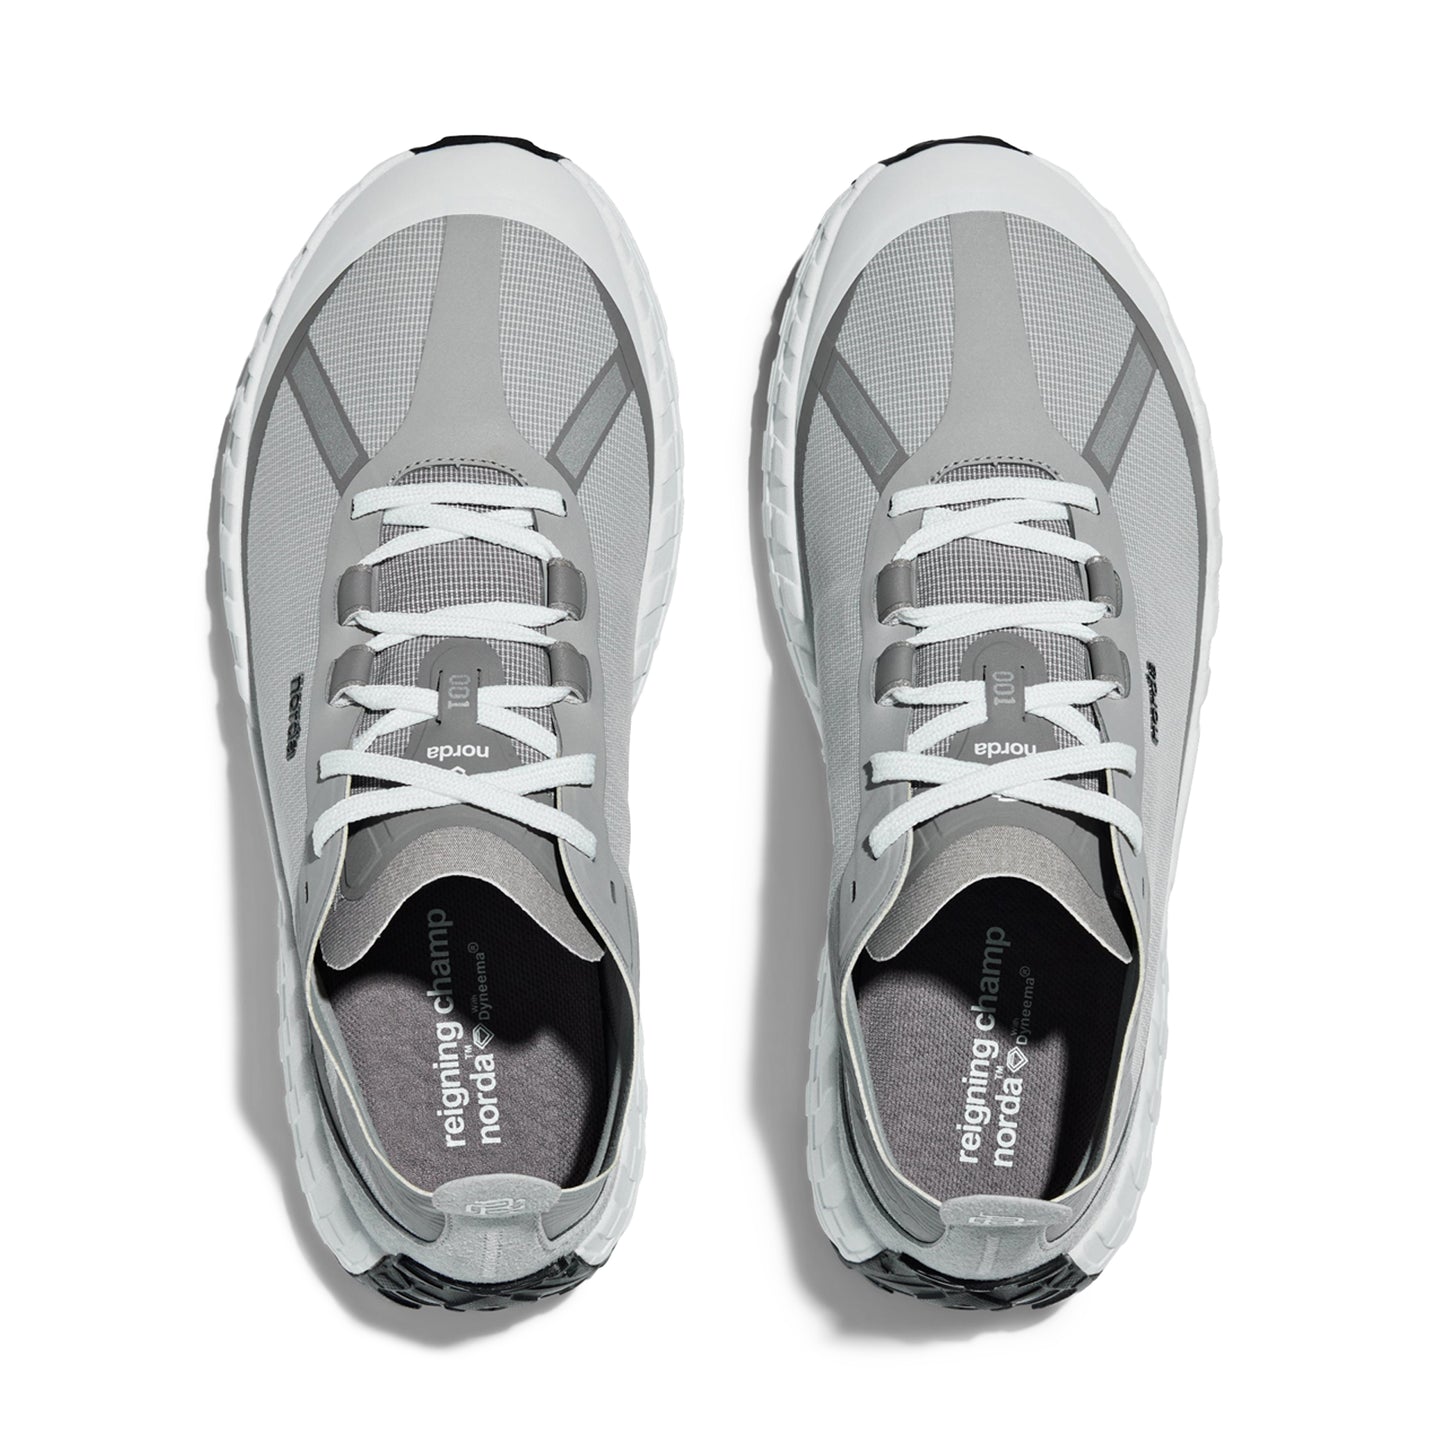 Norda x Reigning Champ 001 Trail Shoes